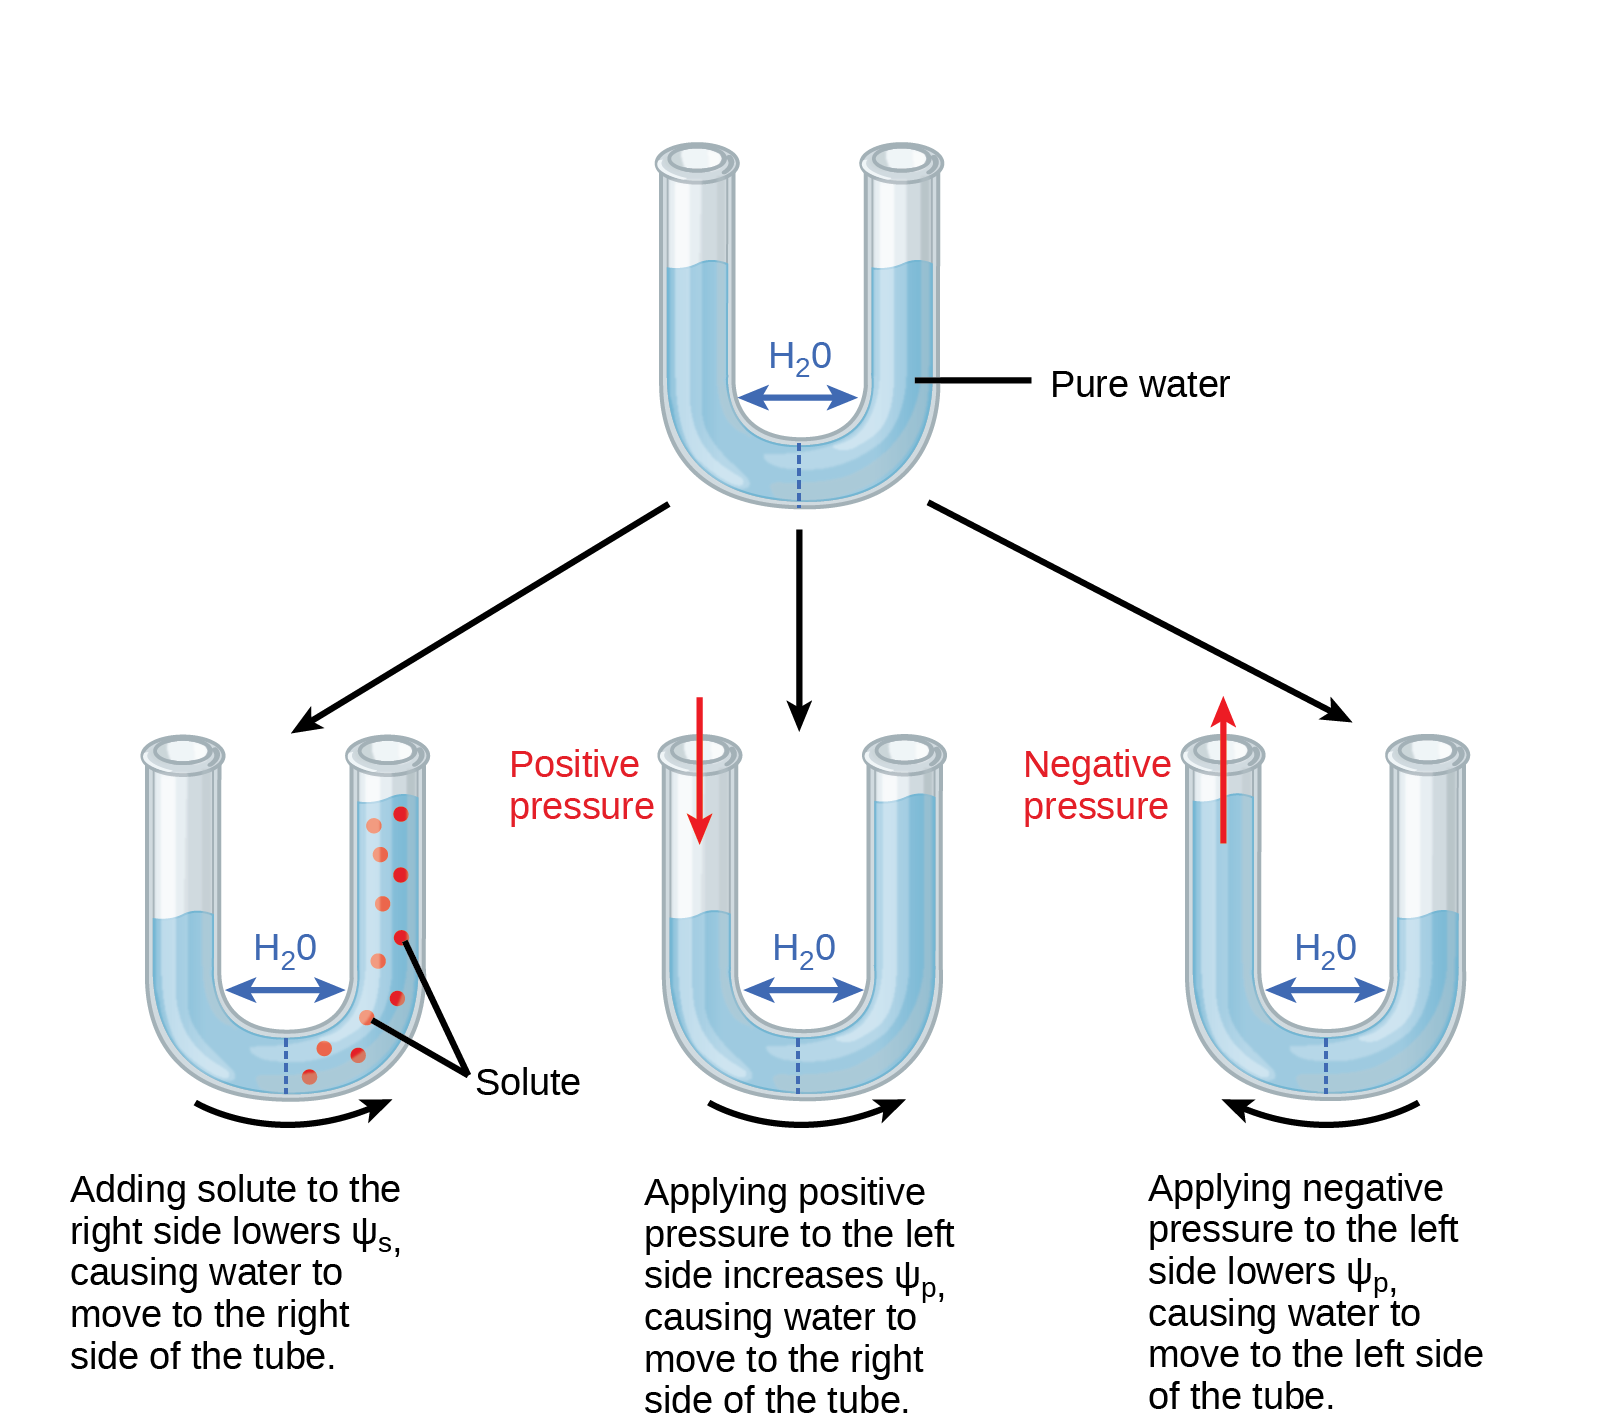 Illustration shows a U-shaped tube holding pure water. A semipermeable membrane, which allows water but not solutes to pass, separates the two sides of the tube. The water level on each side of the tube is the same. Beneath this tube are three more tubes, also divided by semipermeable membranes. In the first tube, solute has been added to the right side. Adding solute to the right side lowers p s i dash s, causing water to move to the right side of the tube. As a result, the water level is higher on the right side. The second tube has pure water on both sides of the membrane. Positive pressure is applied to the left side. Applying positive pressure to the left side causes p s i dash p to increase. As a results, water moves to the right so that the water level is higher on the right than on the left. The third tube also has pure water, but this time negative pressure is applied to the left side. Applying negative pressure lowers p s i dash p, causing water to move to the left side of the tube. As a result, the water level is higher on the left.